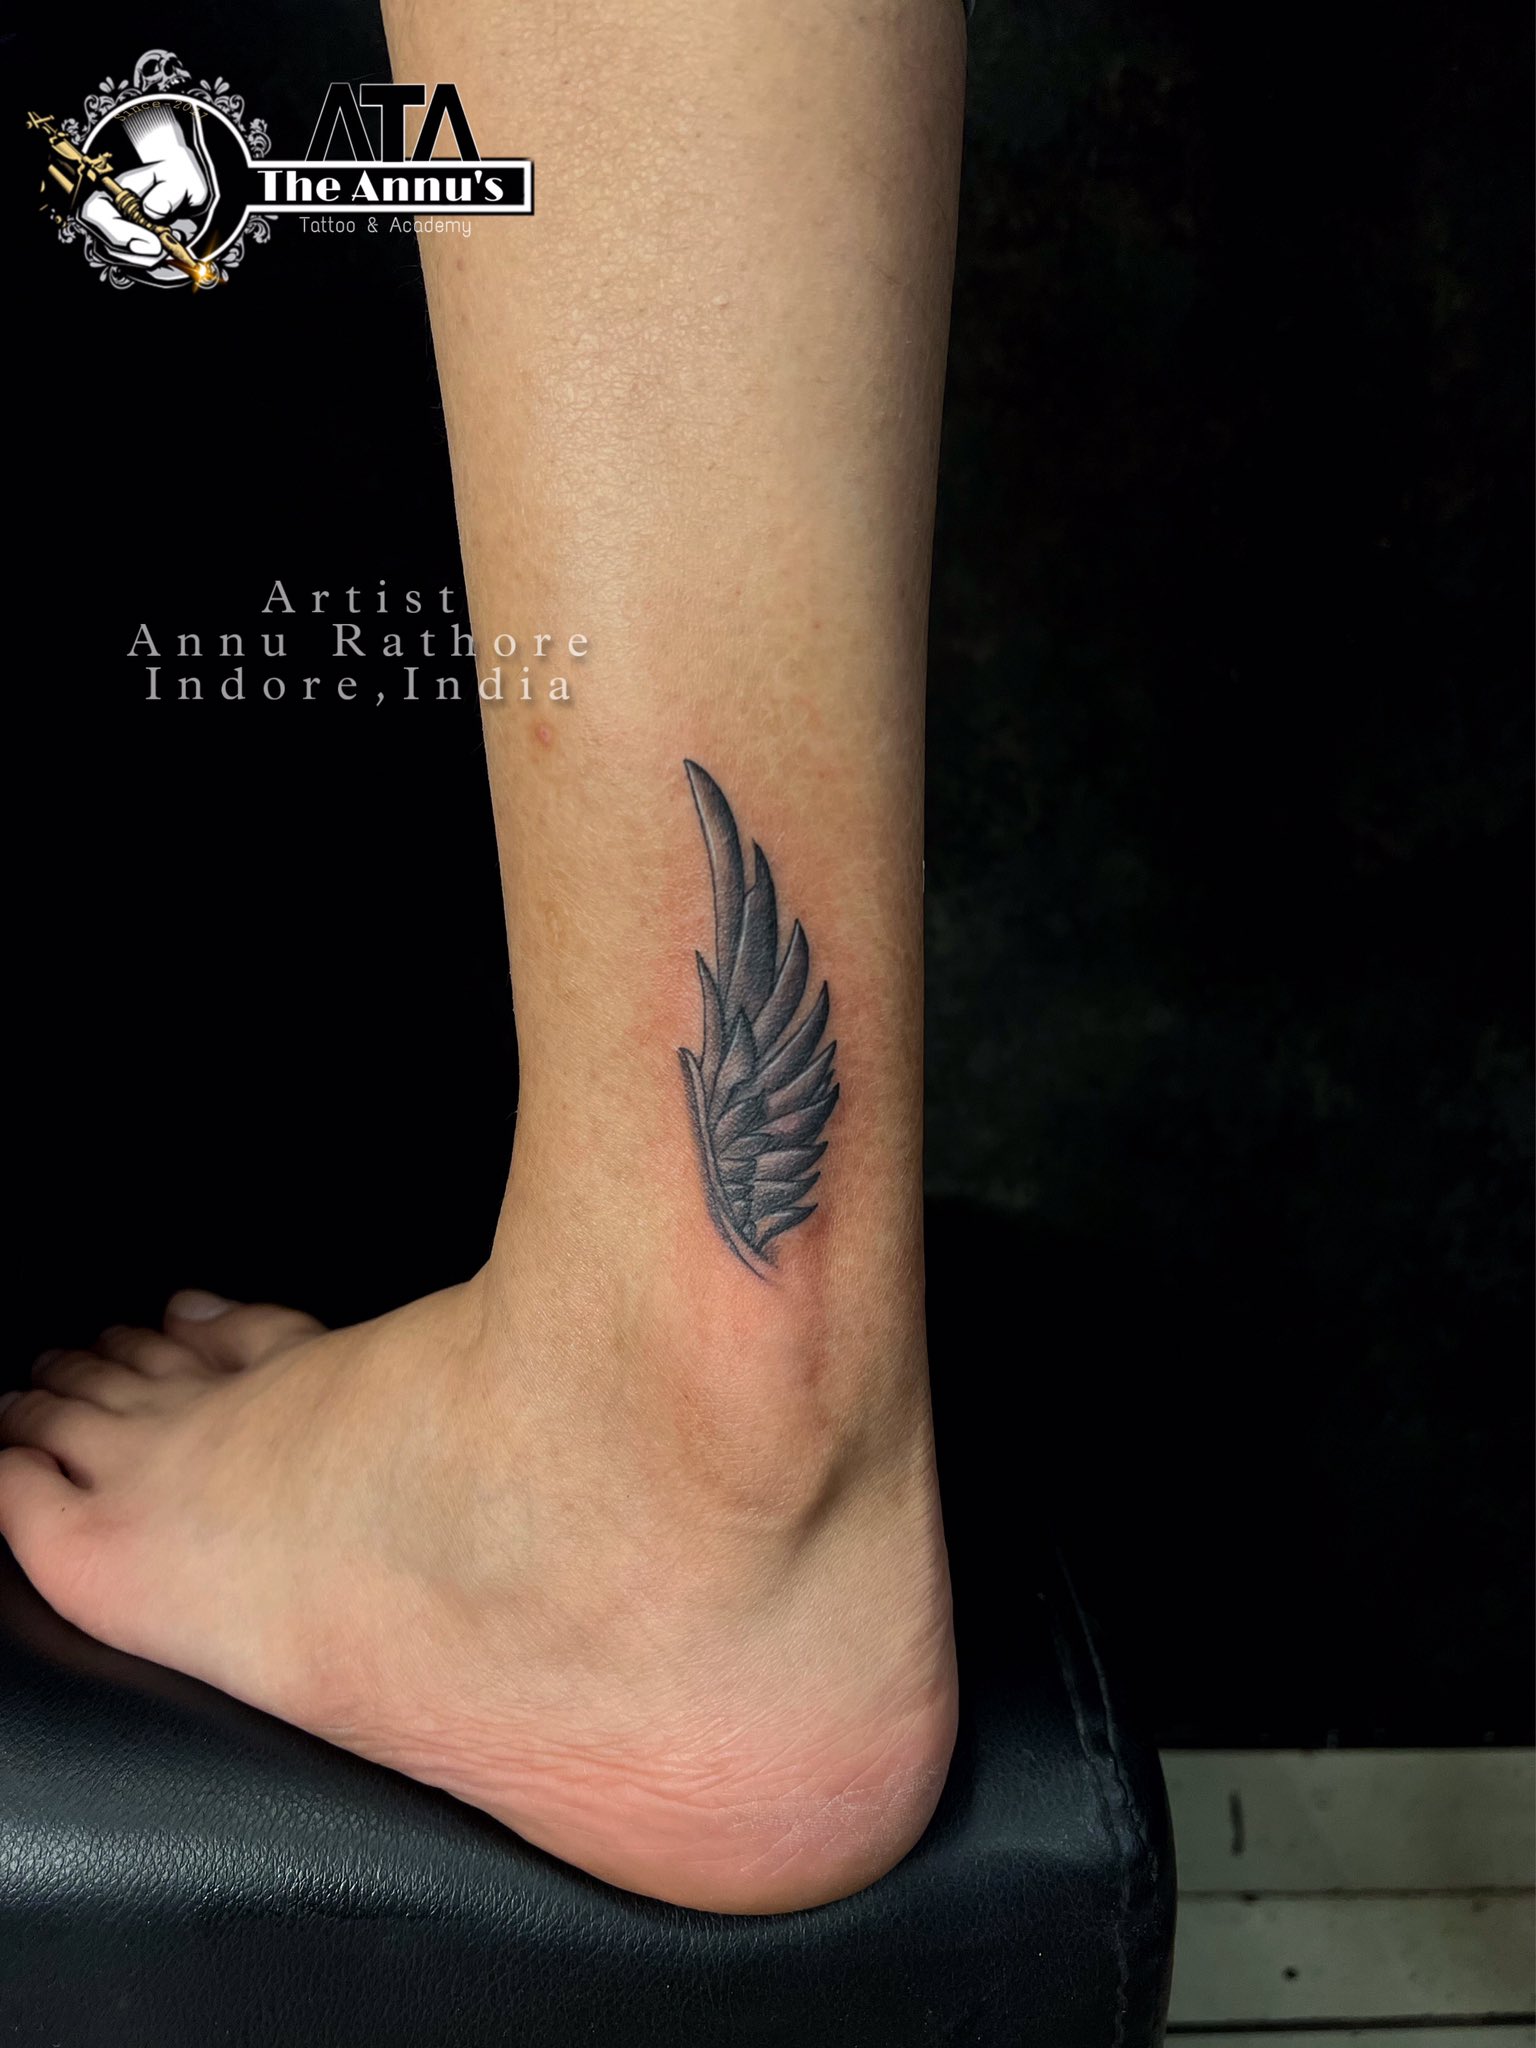 43 Pretty Ankle Tattoos Every Woman Would Want - StayGlam | Anklet tattoos  for women, Tattoo bracelet, Ankle bracelet tattoo